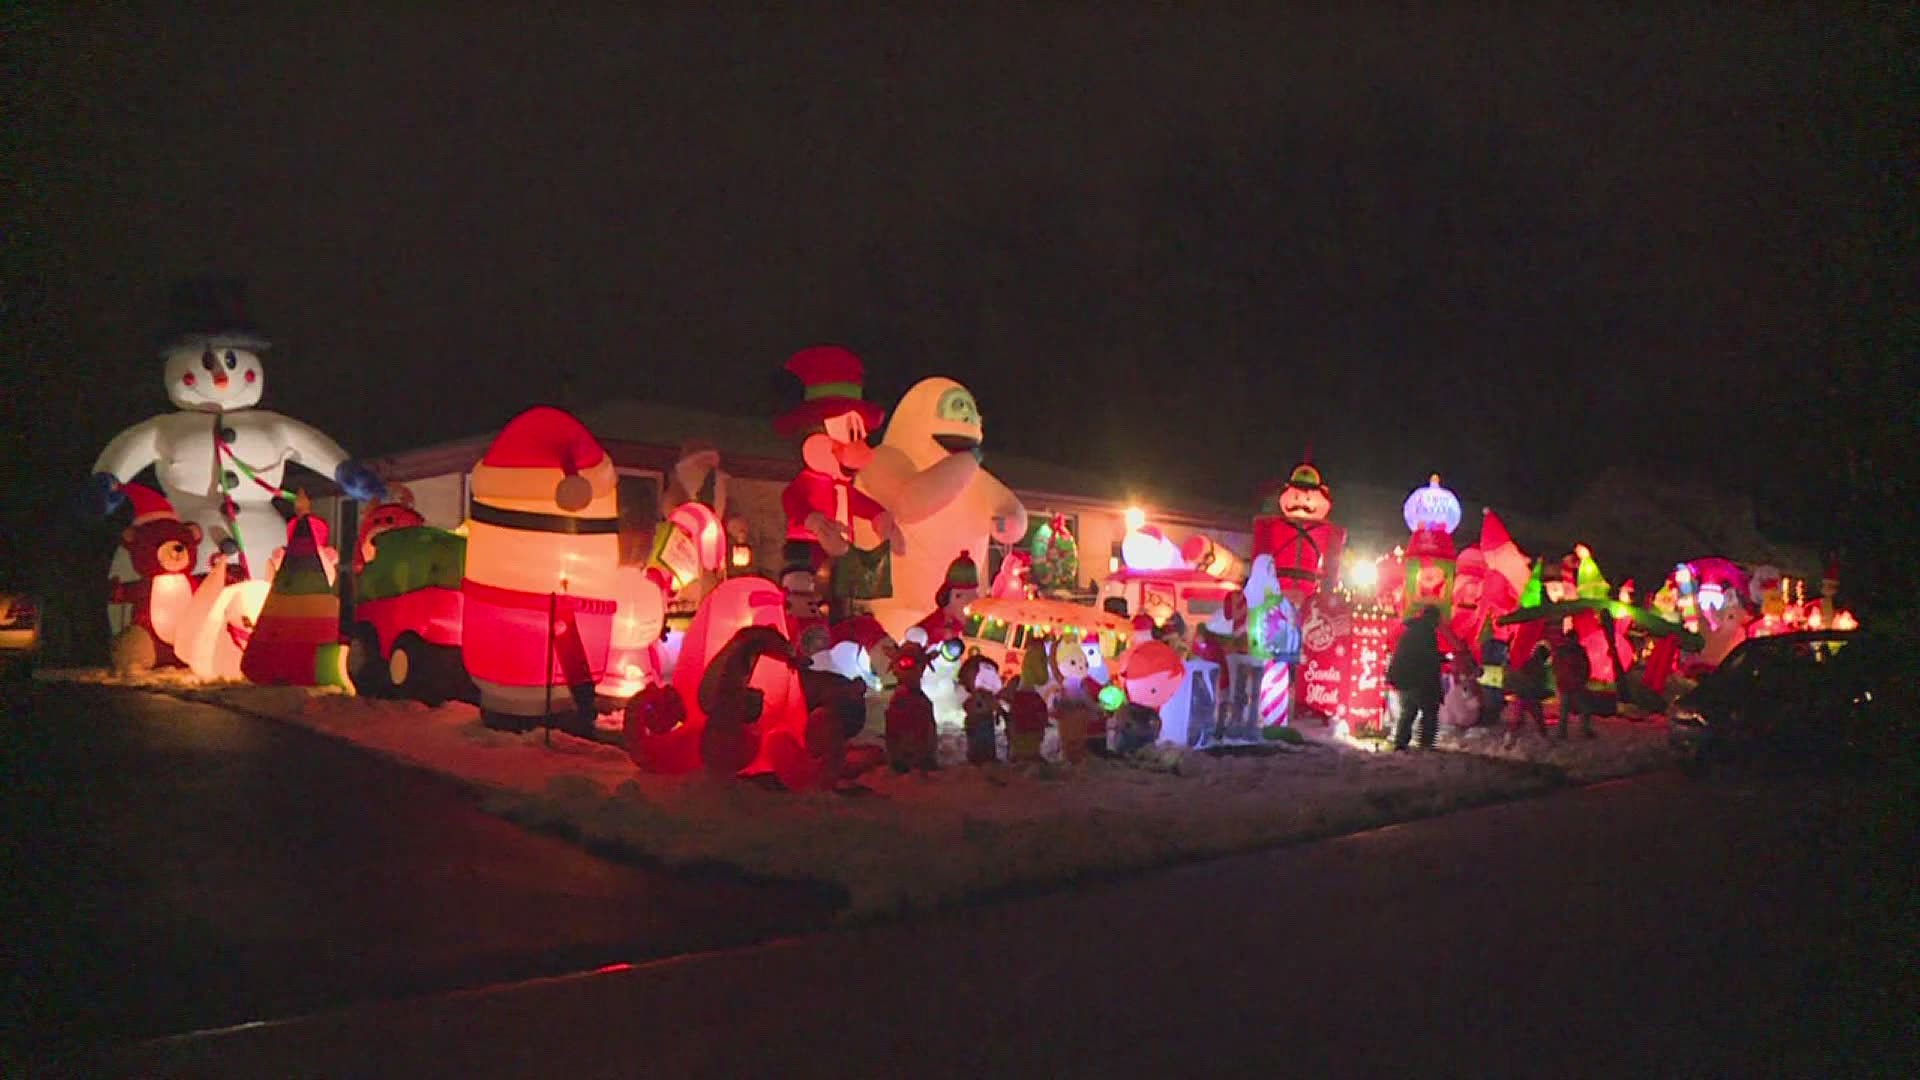 One Coal Valley family went all out with their holiday decorations... and it's all for a great cause.